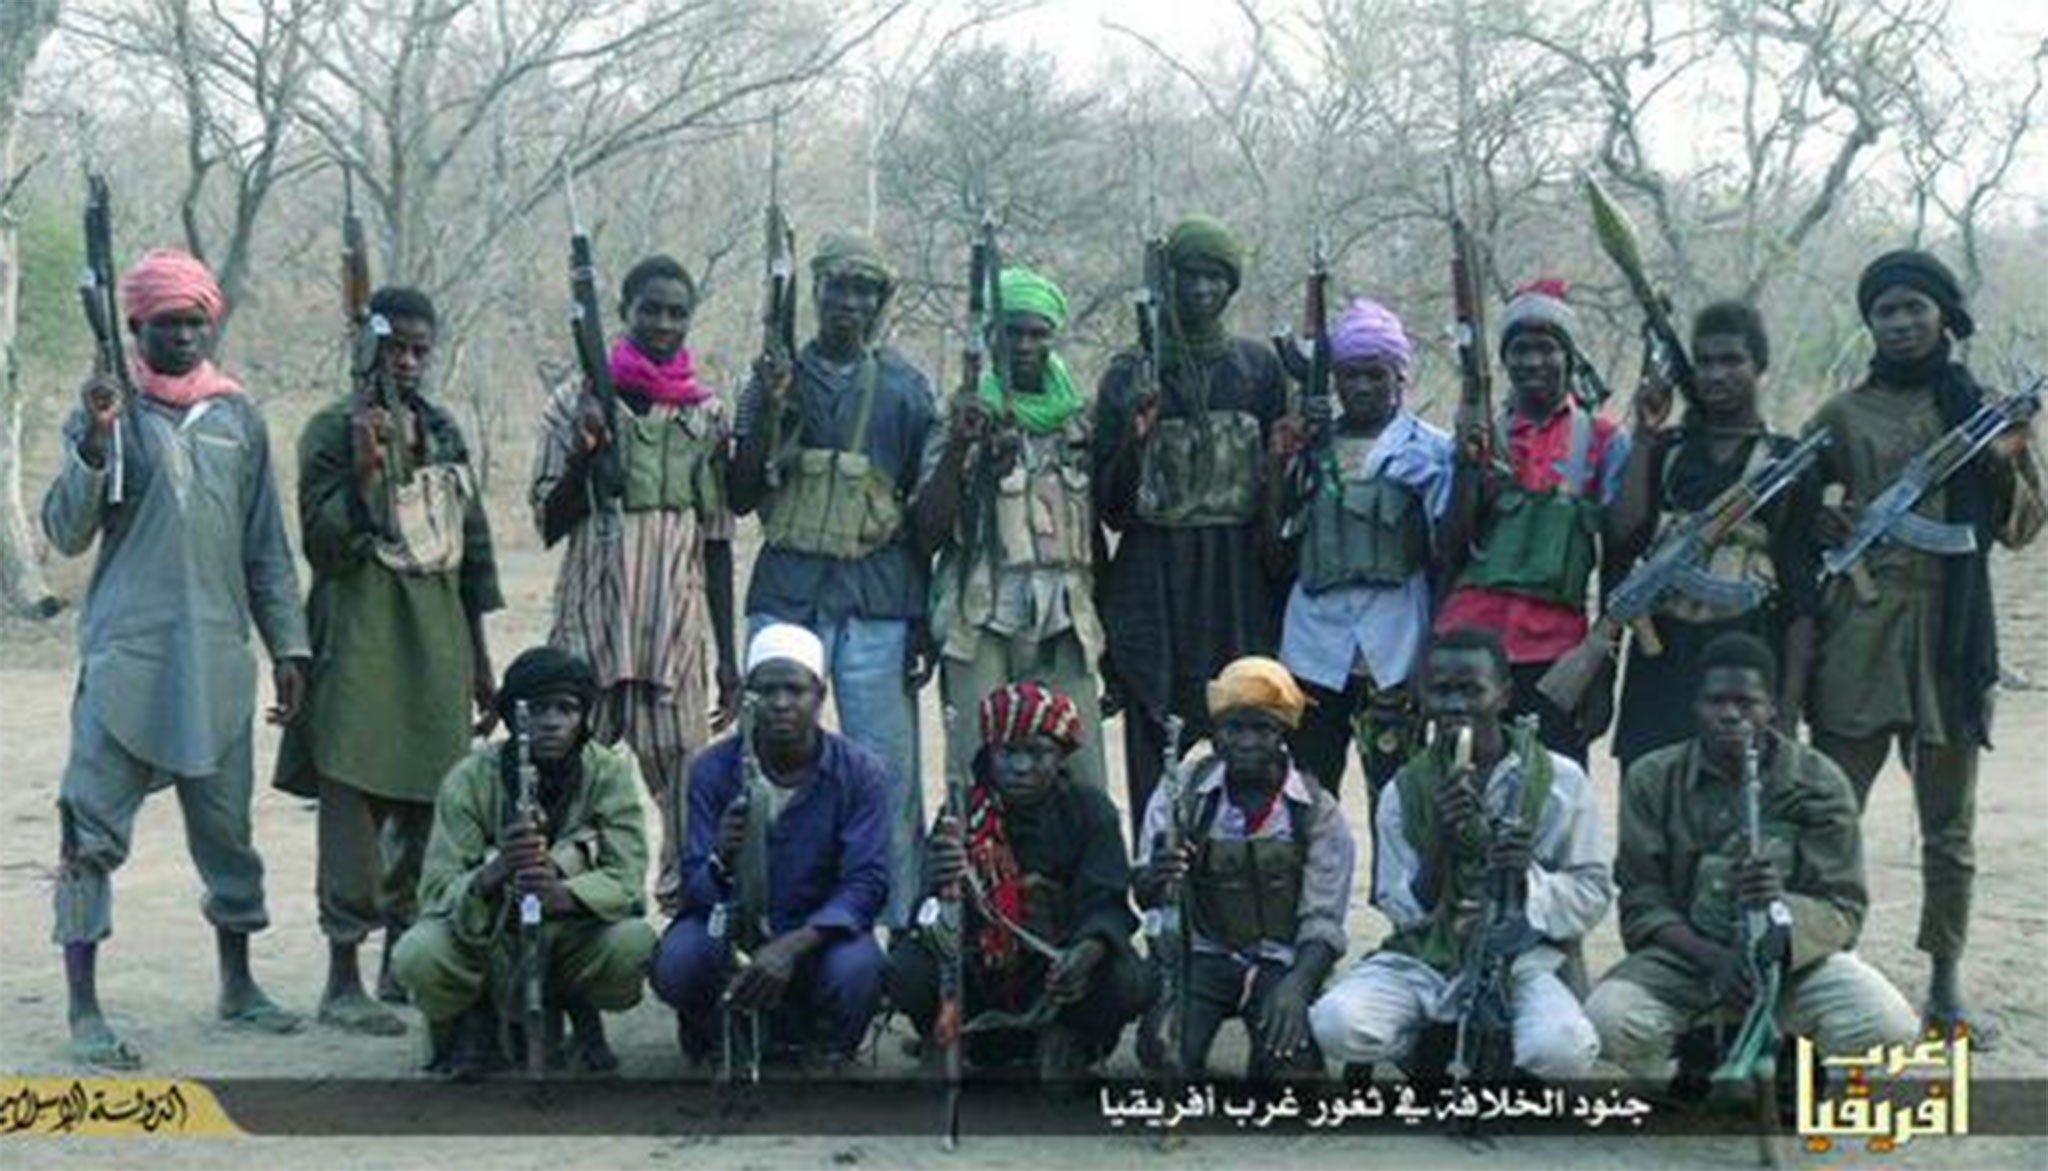 New Boko Haram propaganda named the group as Iswap - 'Islamic State's West Africa Province'